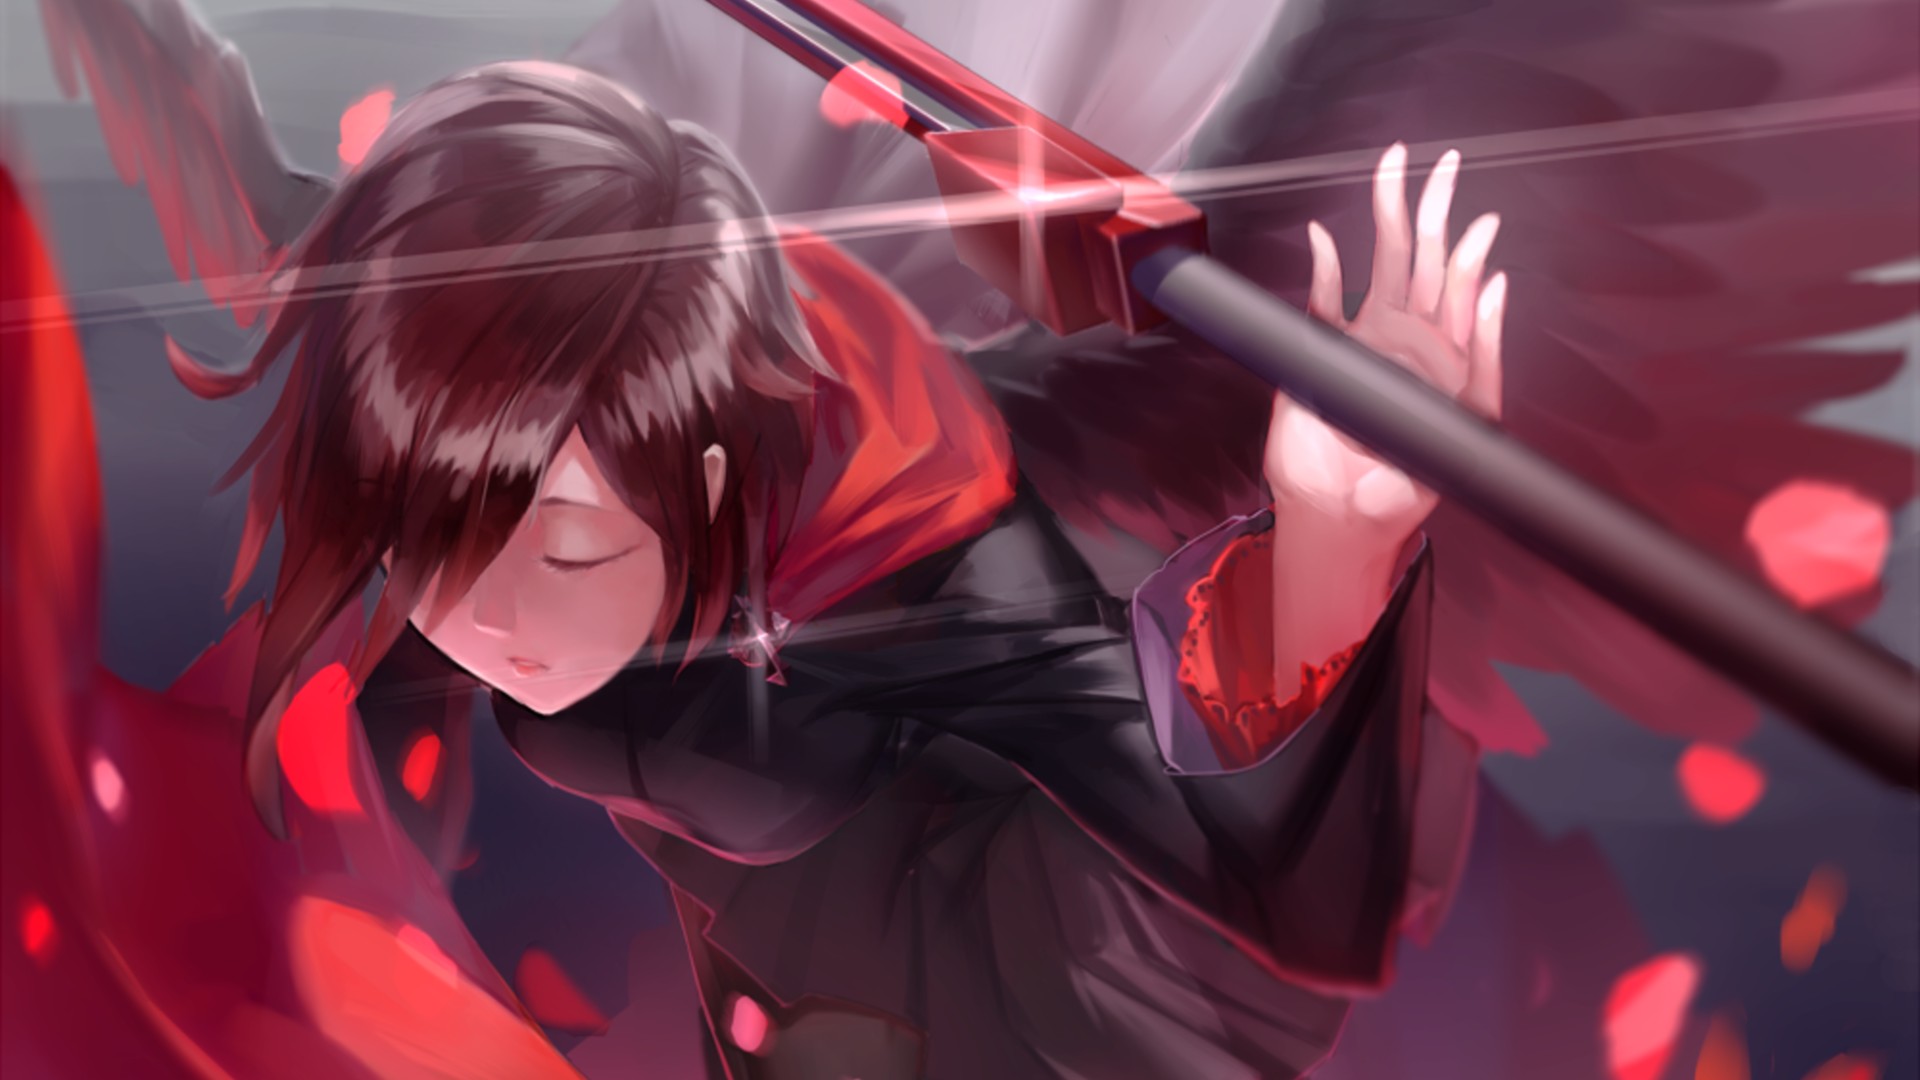 Anime Rwby Ruby Rose Wallpapers Hd Desktop And Mobile Backgrounds